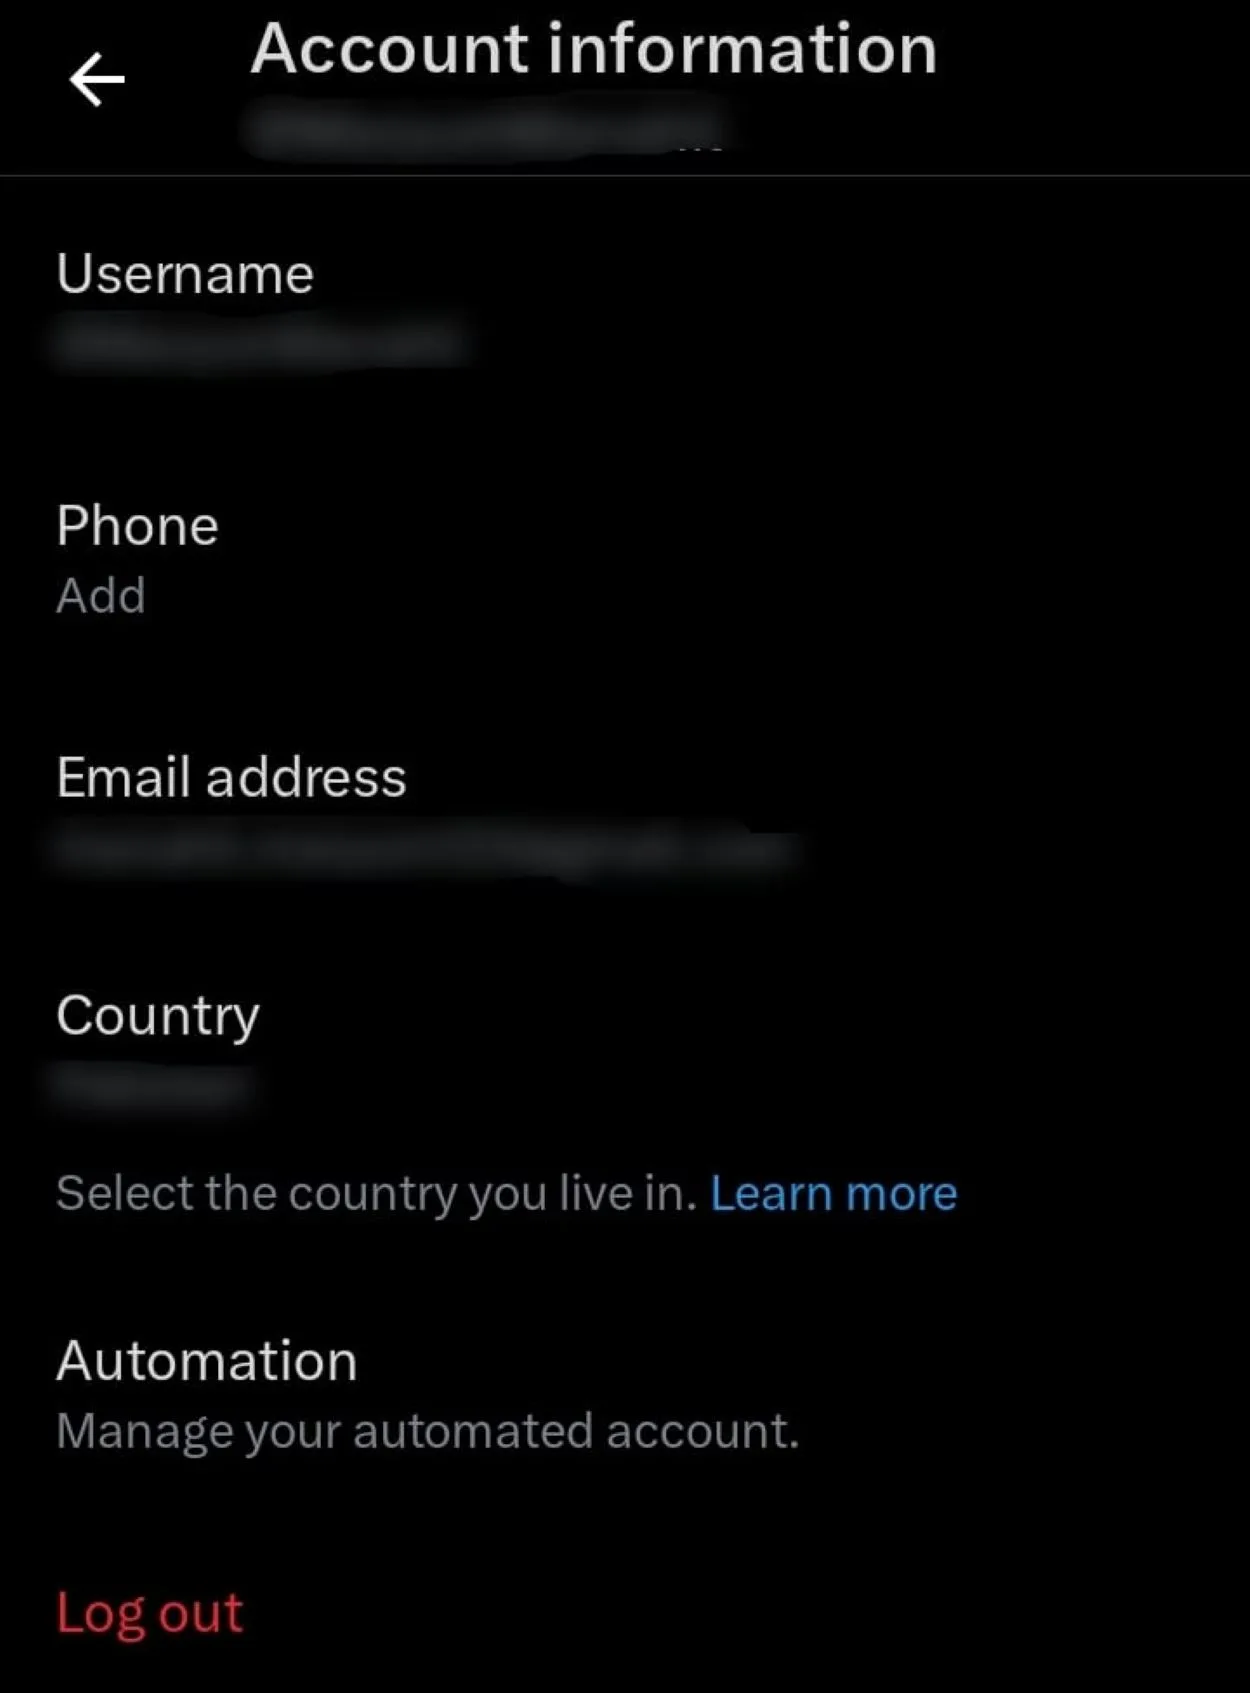 All account information including the option to log out.